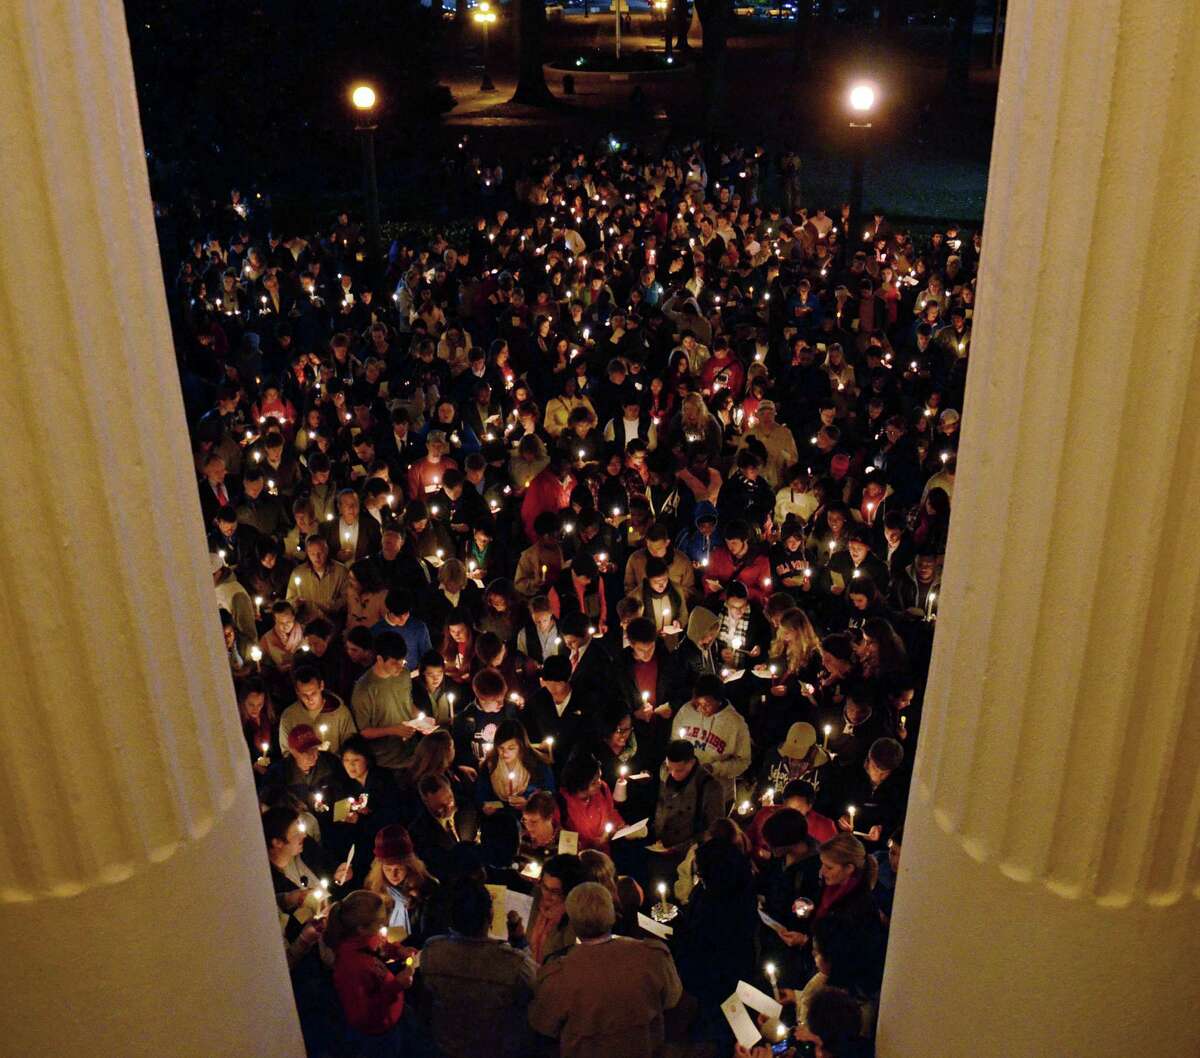 A large crowd made up of primarily of students, faculty and staff listen to University of Mississippi Chancellor Dr. Dan Jones, speak from the steps of the Lyceum during the "We are One Mississippi" candlelight walk on the campus in Oxford, Miss., Wednesday, Nov. 7, 2012. The walk was organized to condemn a Tuesday night protest against the re-election of President Barack Obama, during which some students chanted political slogans while others used derogatory racial statements and profanity, according to a statement from the university. (AP Photo/The Daily Mississippian, Thomas Graning) MANDATORY CREDIT